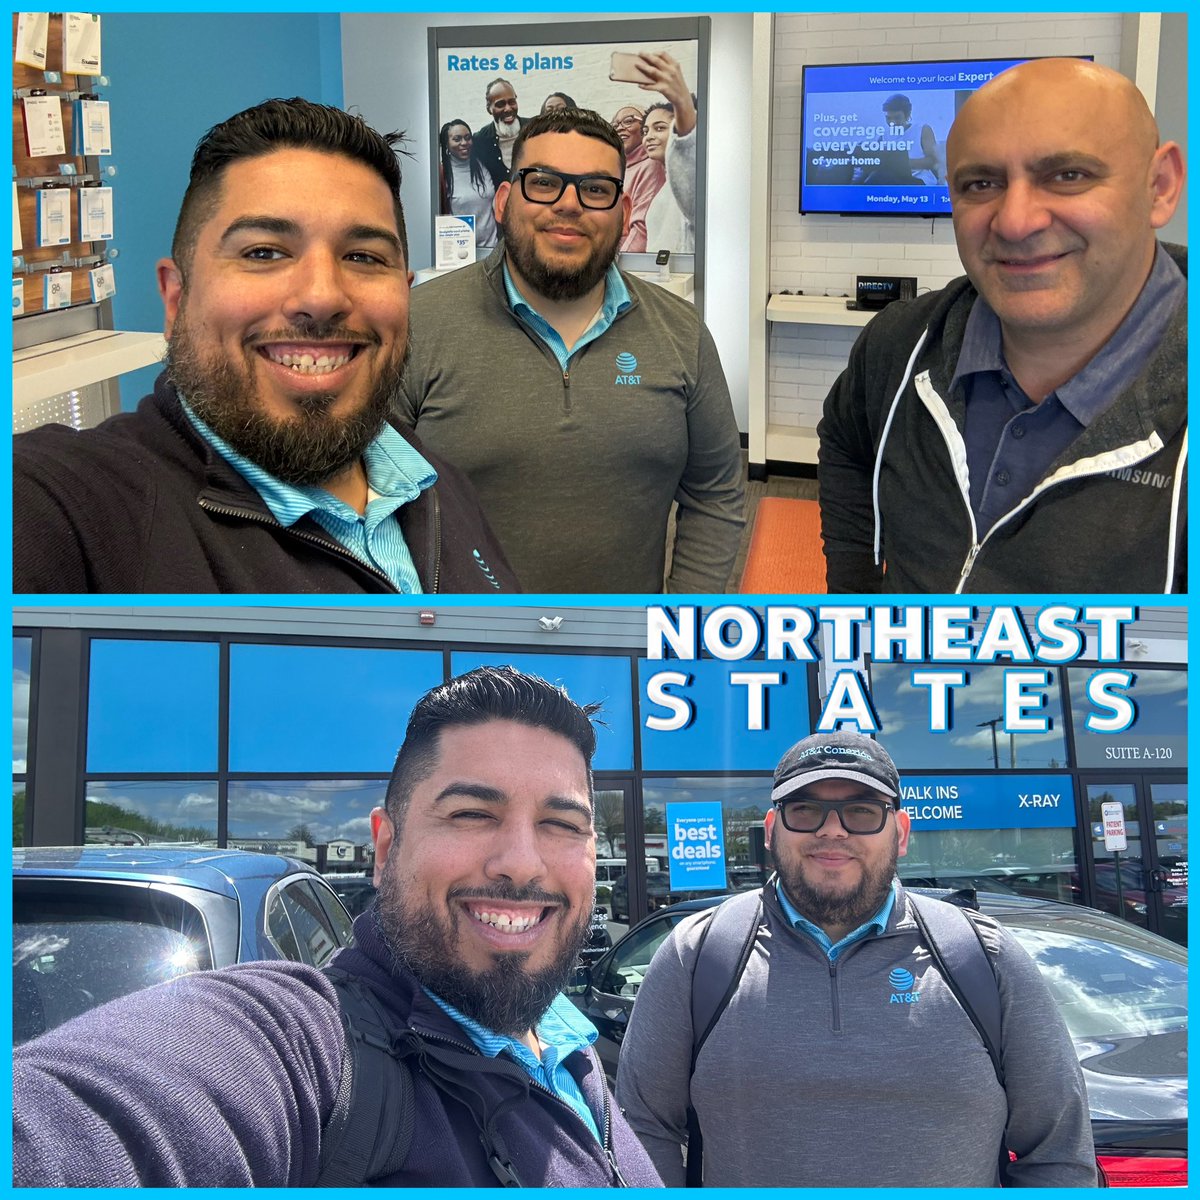 Spreading the #FirstNet first mentality with @EdwinACartagena and @firas_smadi, skilling up our pARtners with best practices. #NorthEastStates #TeamHurricane @keroninc